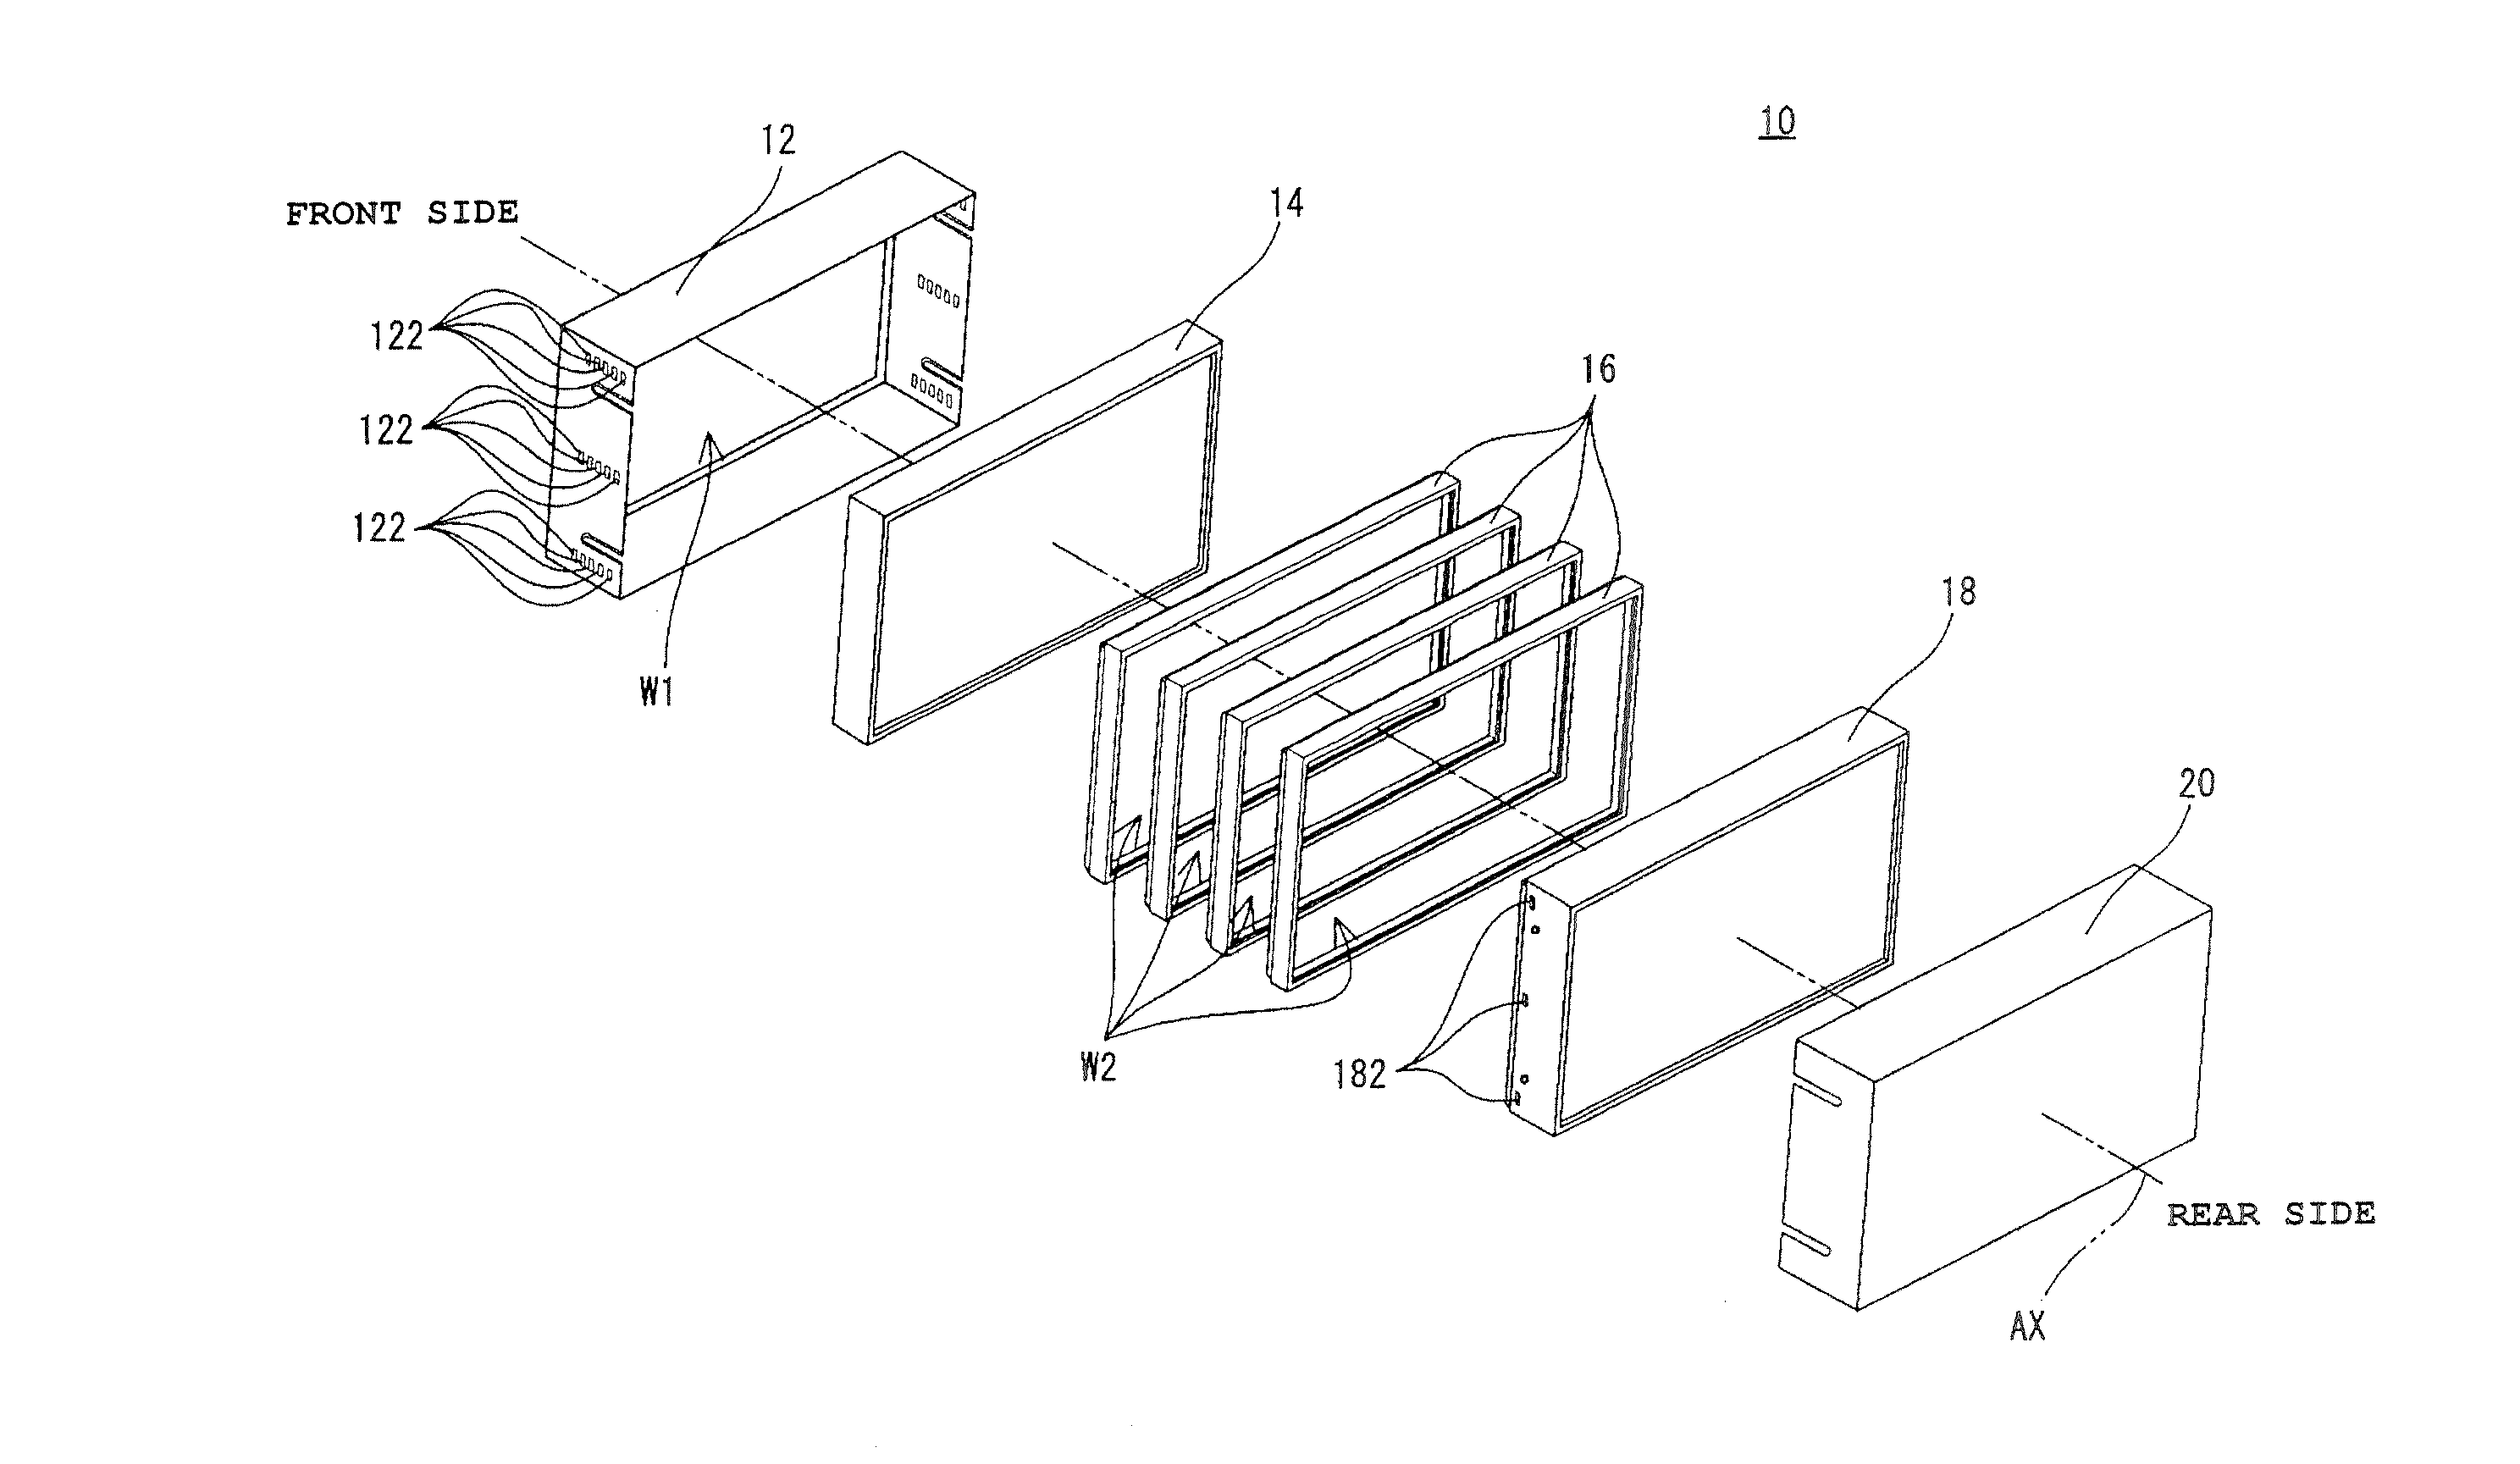 Liquid crystal display device and apparatus with display function